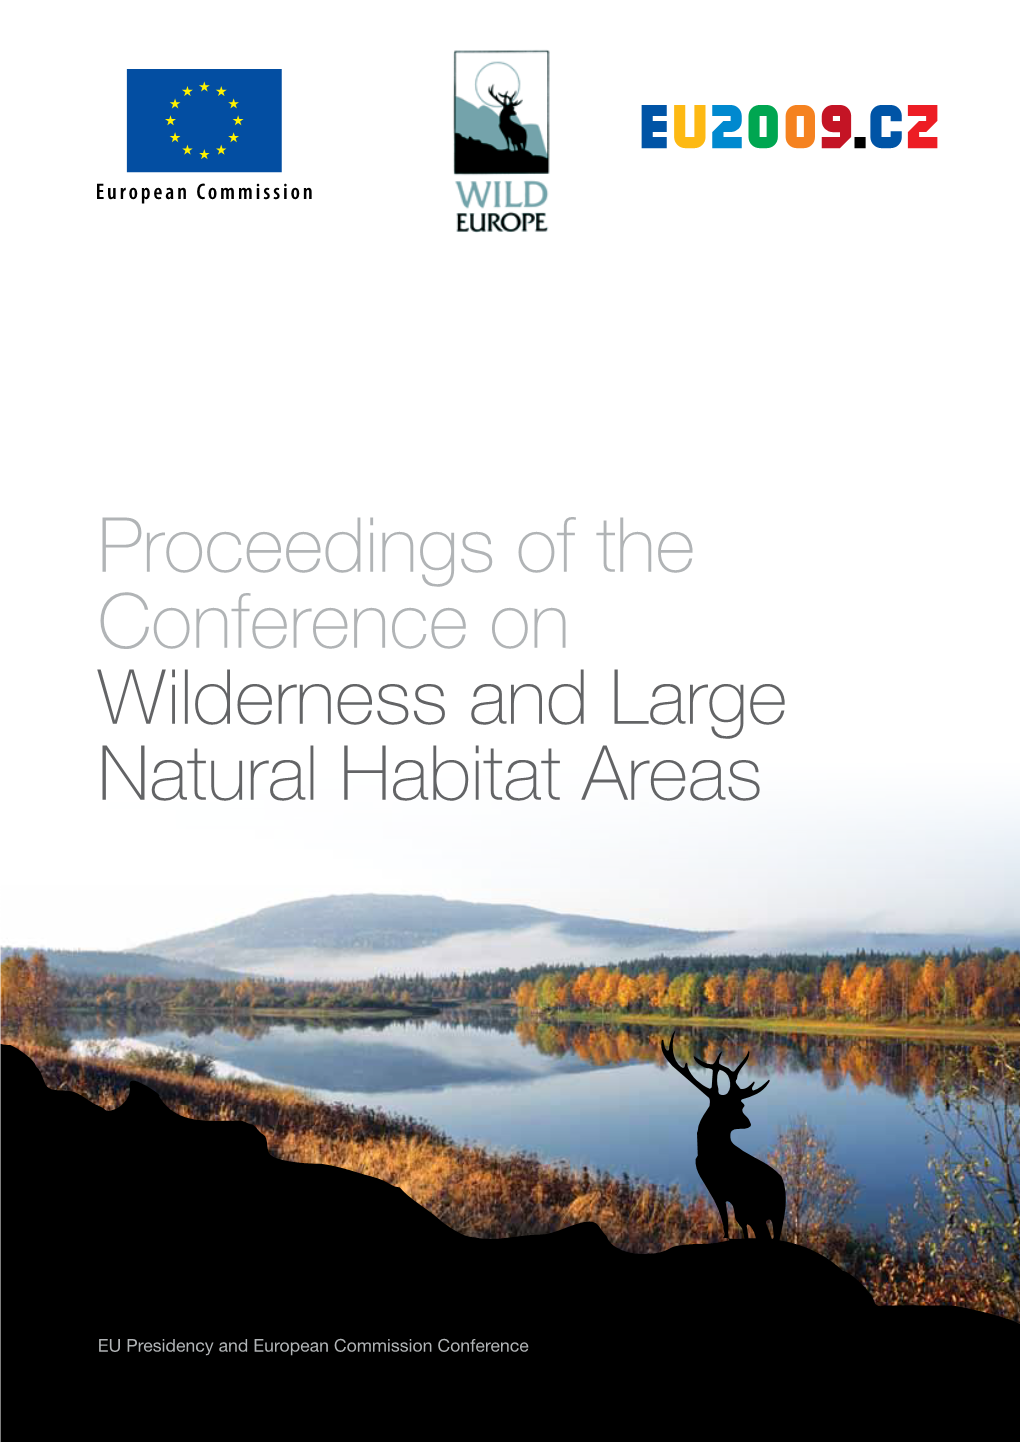 Proceedings of the Conference on Wilderness and Large Natural Habitat Areas